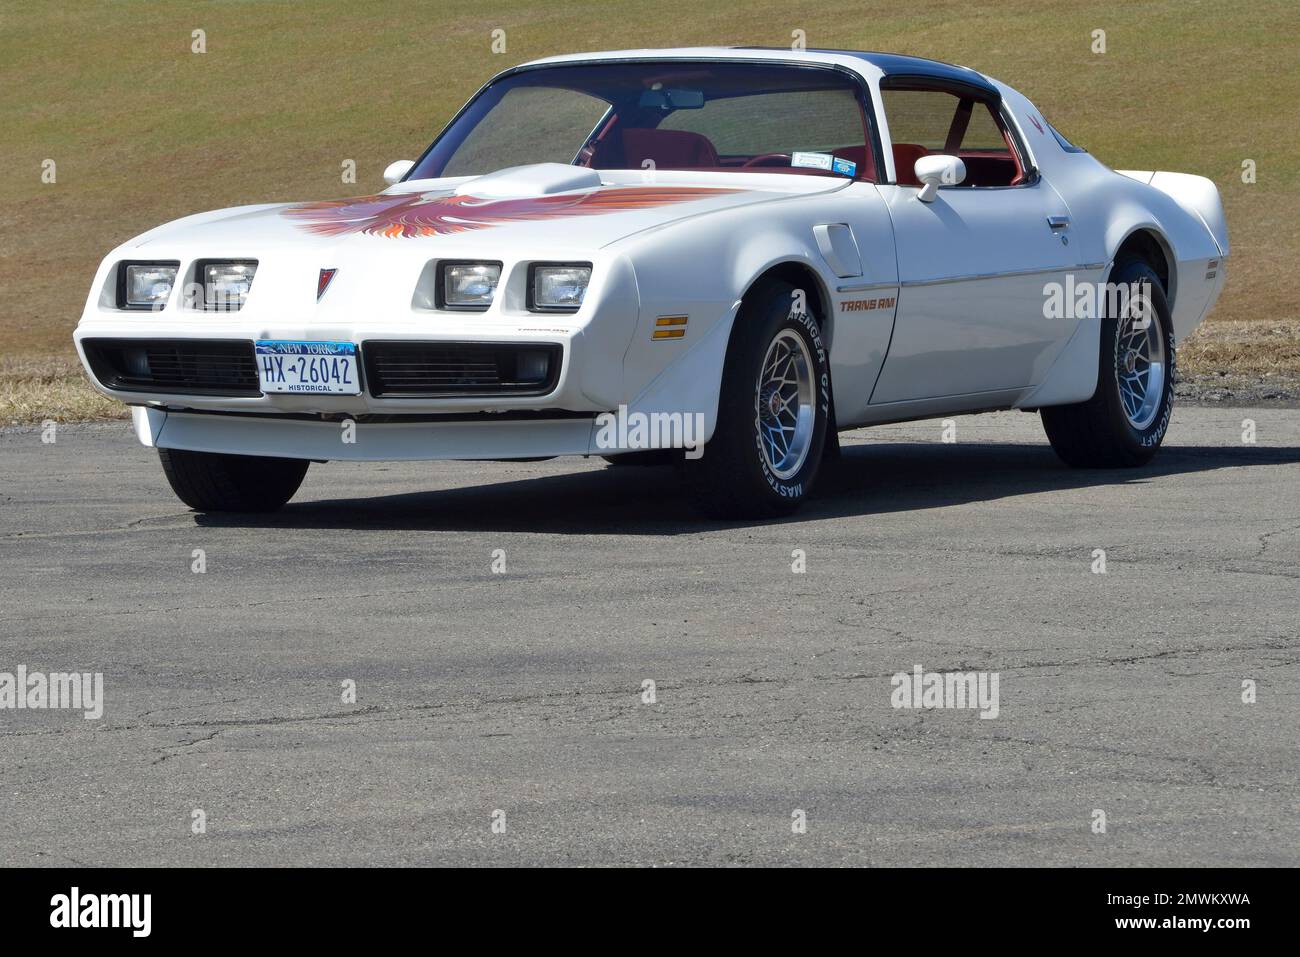 White 1979 Pontiac Trans Am in a three-quarter-front view against grassy background in bright sun. Stock Photo